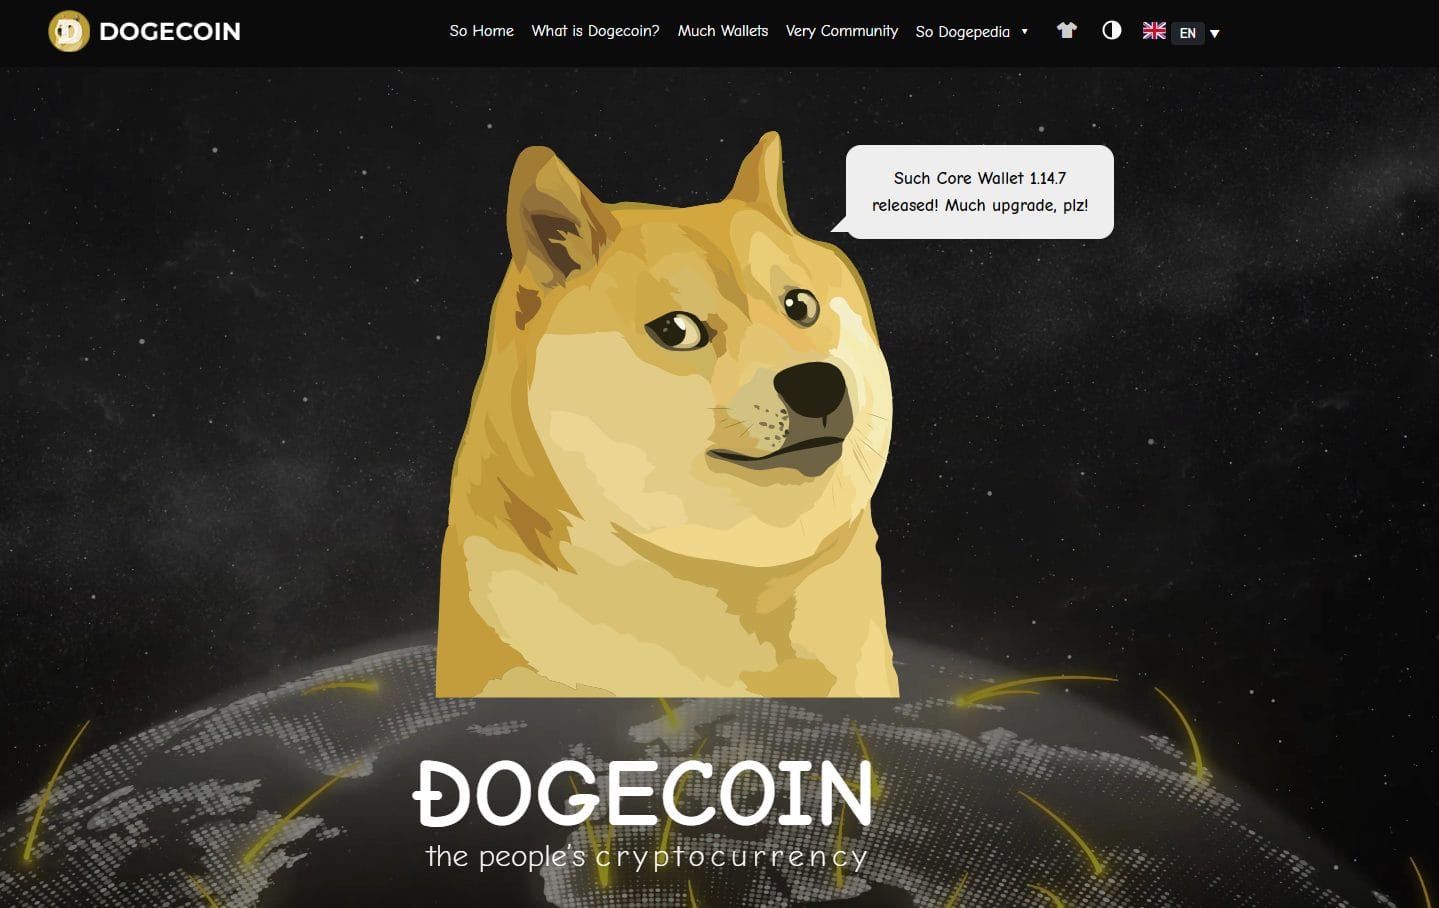 The website homepage of the original meme coin, Dogecoin